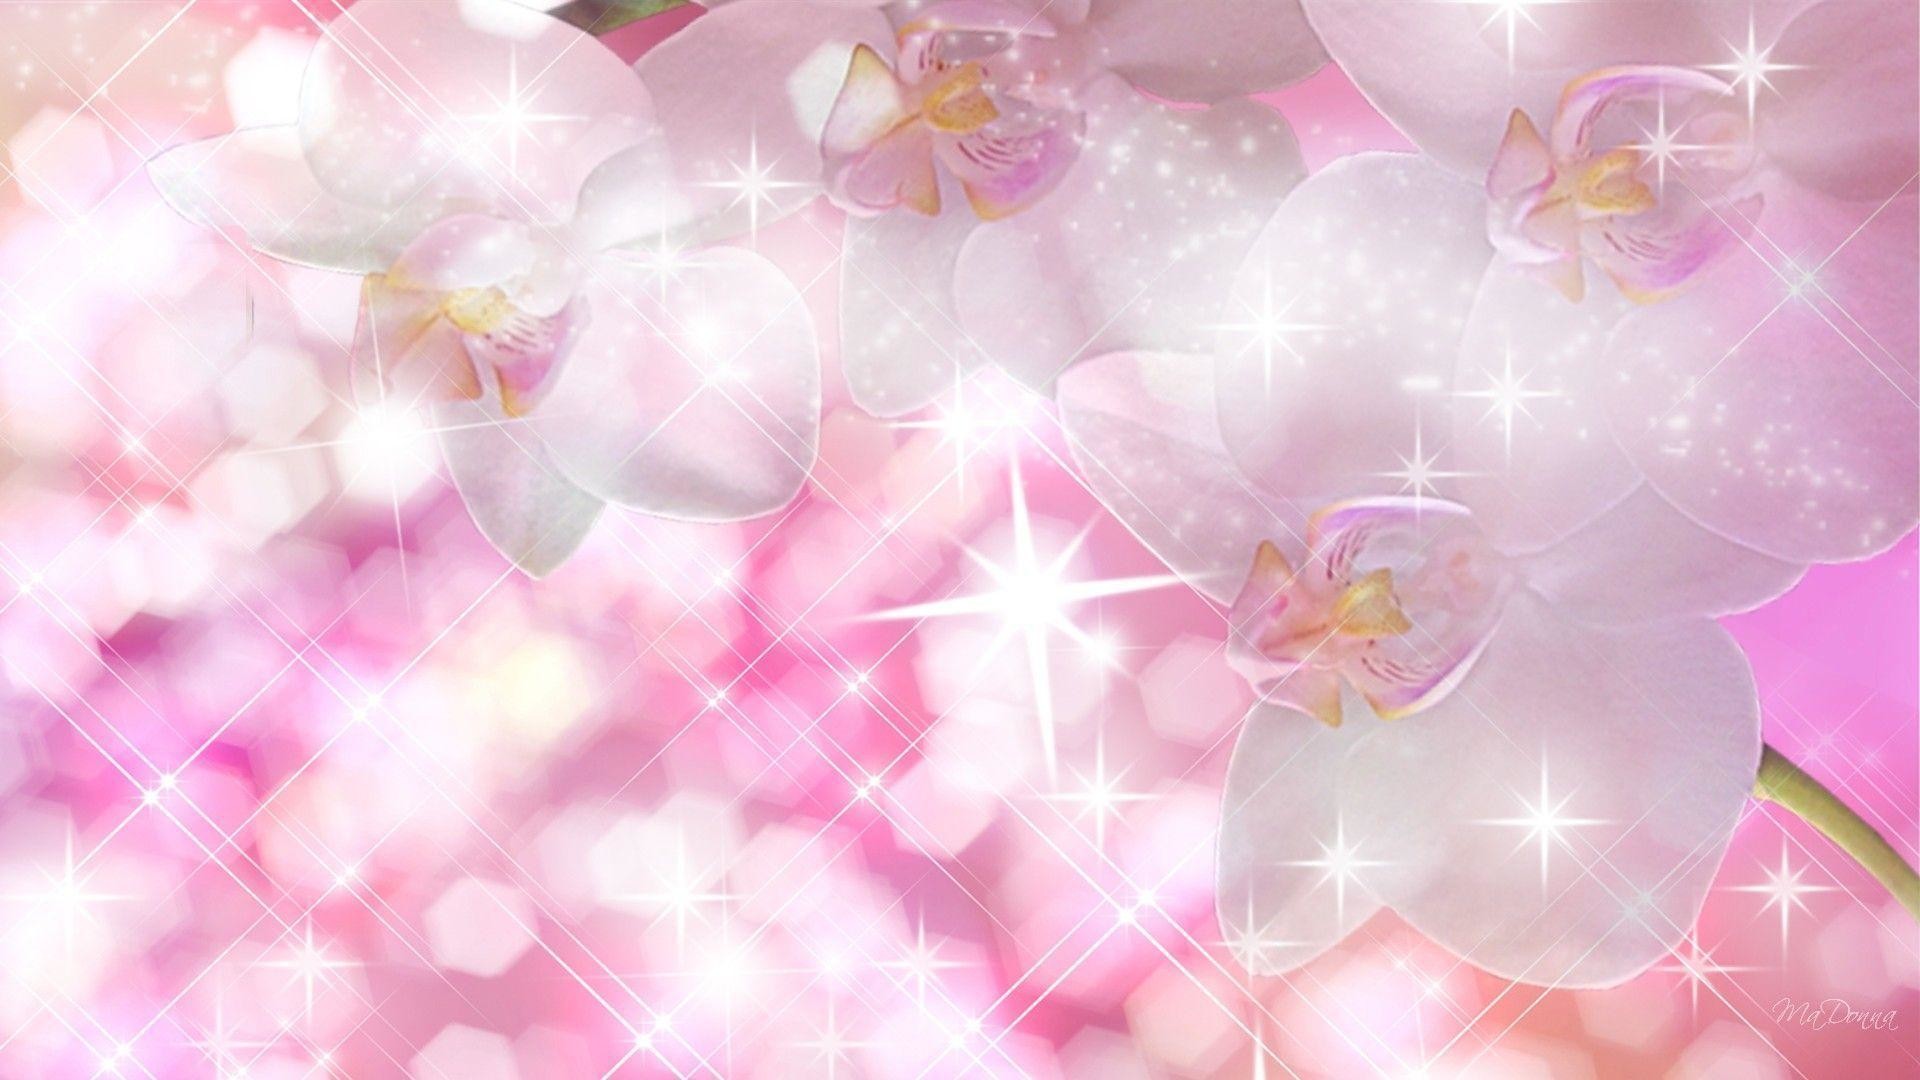 1920x1080 Wallpaper: Wallpapers For Gt Pink Sparkle Wallpaper, White Sparkle .